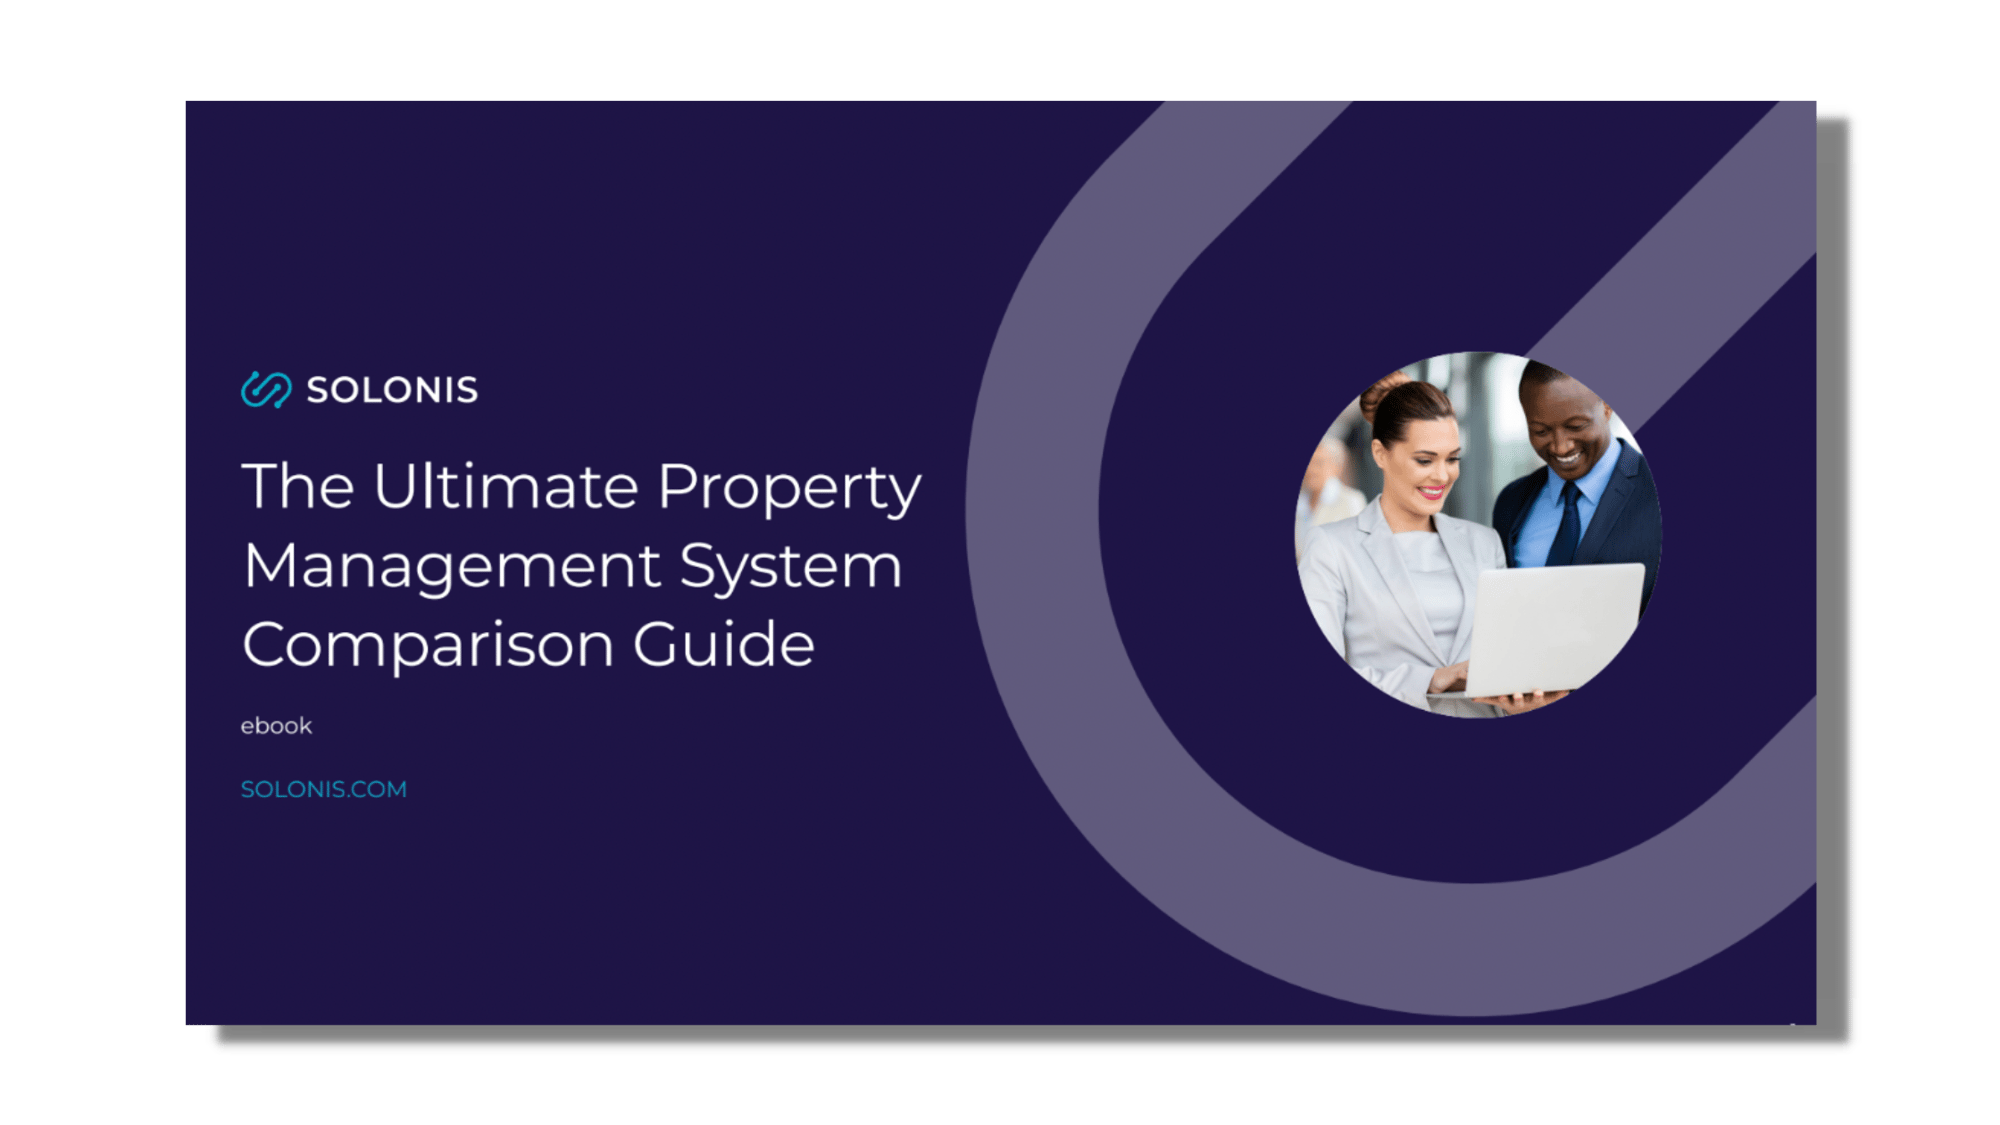 The Ultimate Property Management System Comparison Guide